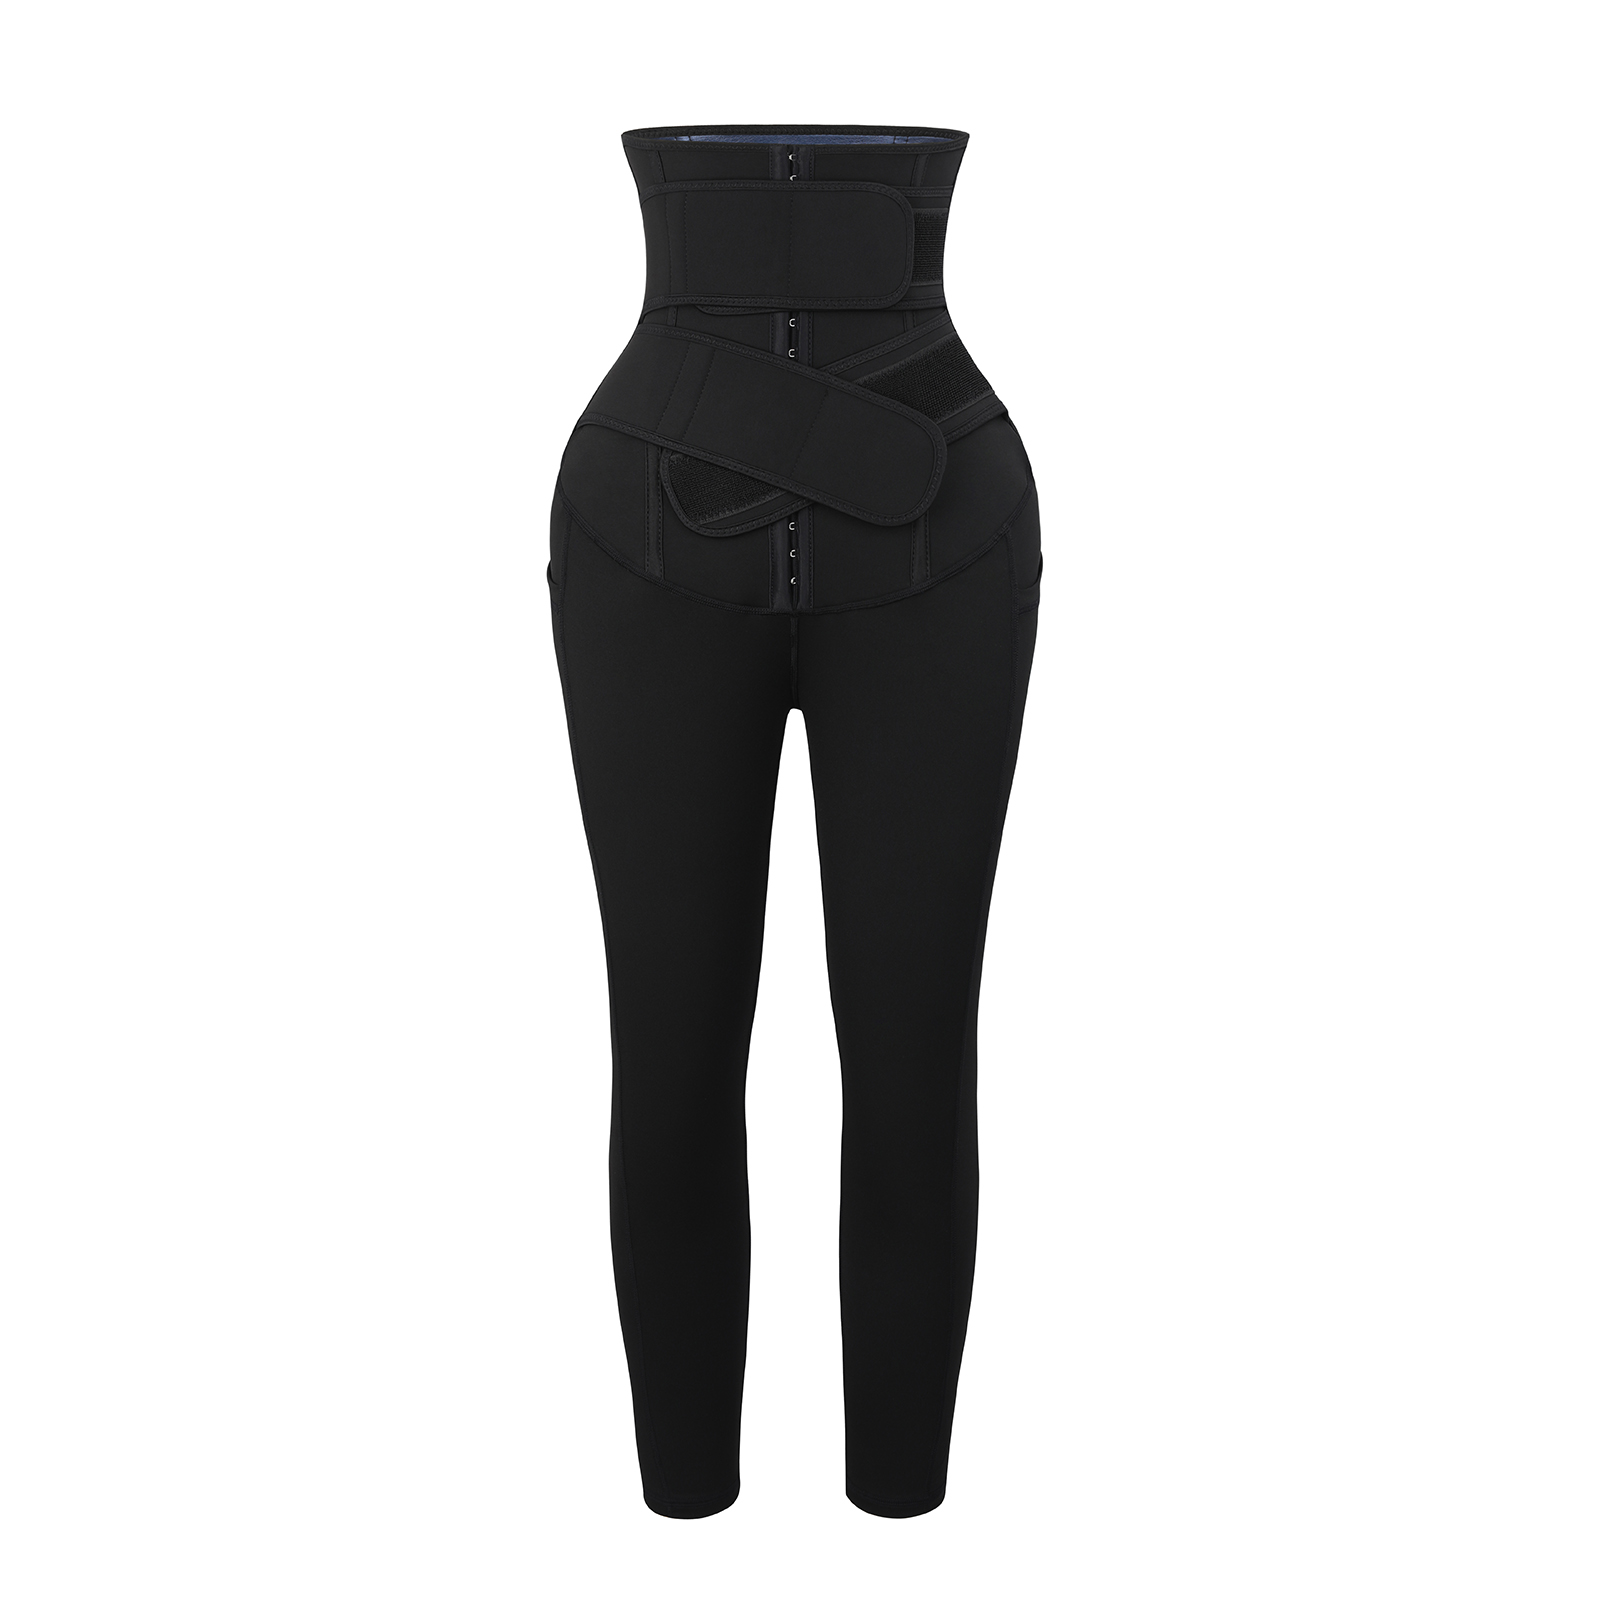 Black high waisted shaping workout leggings with pockets